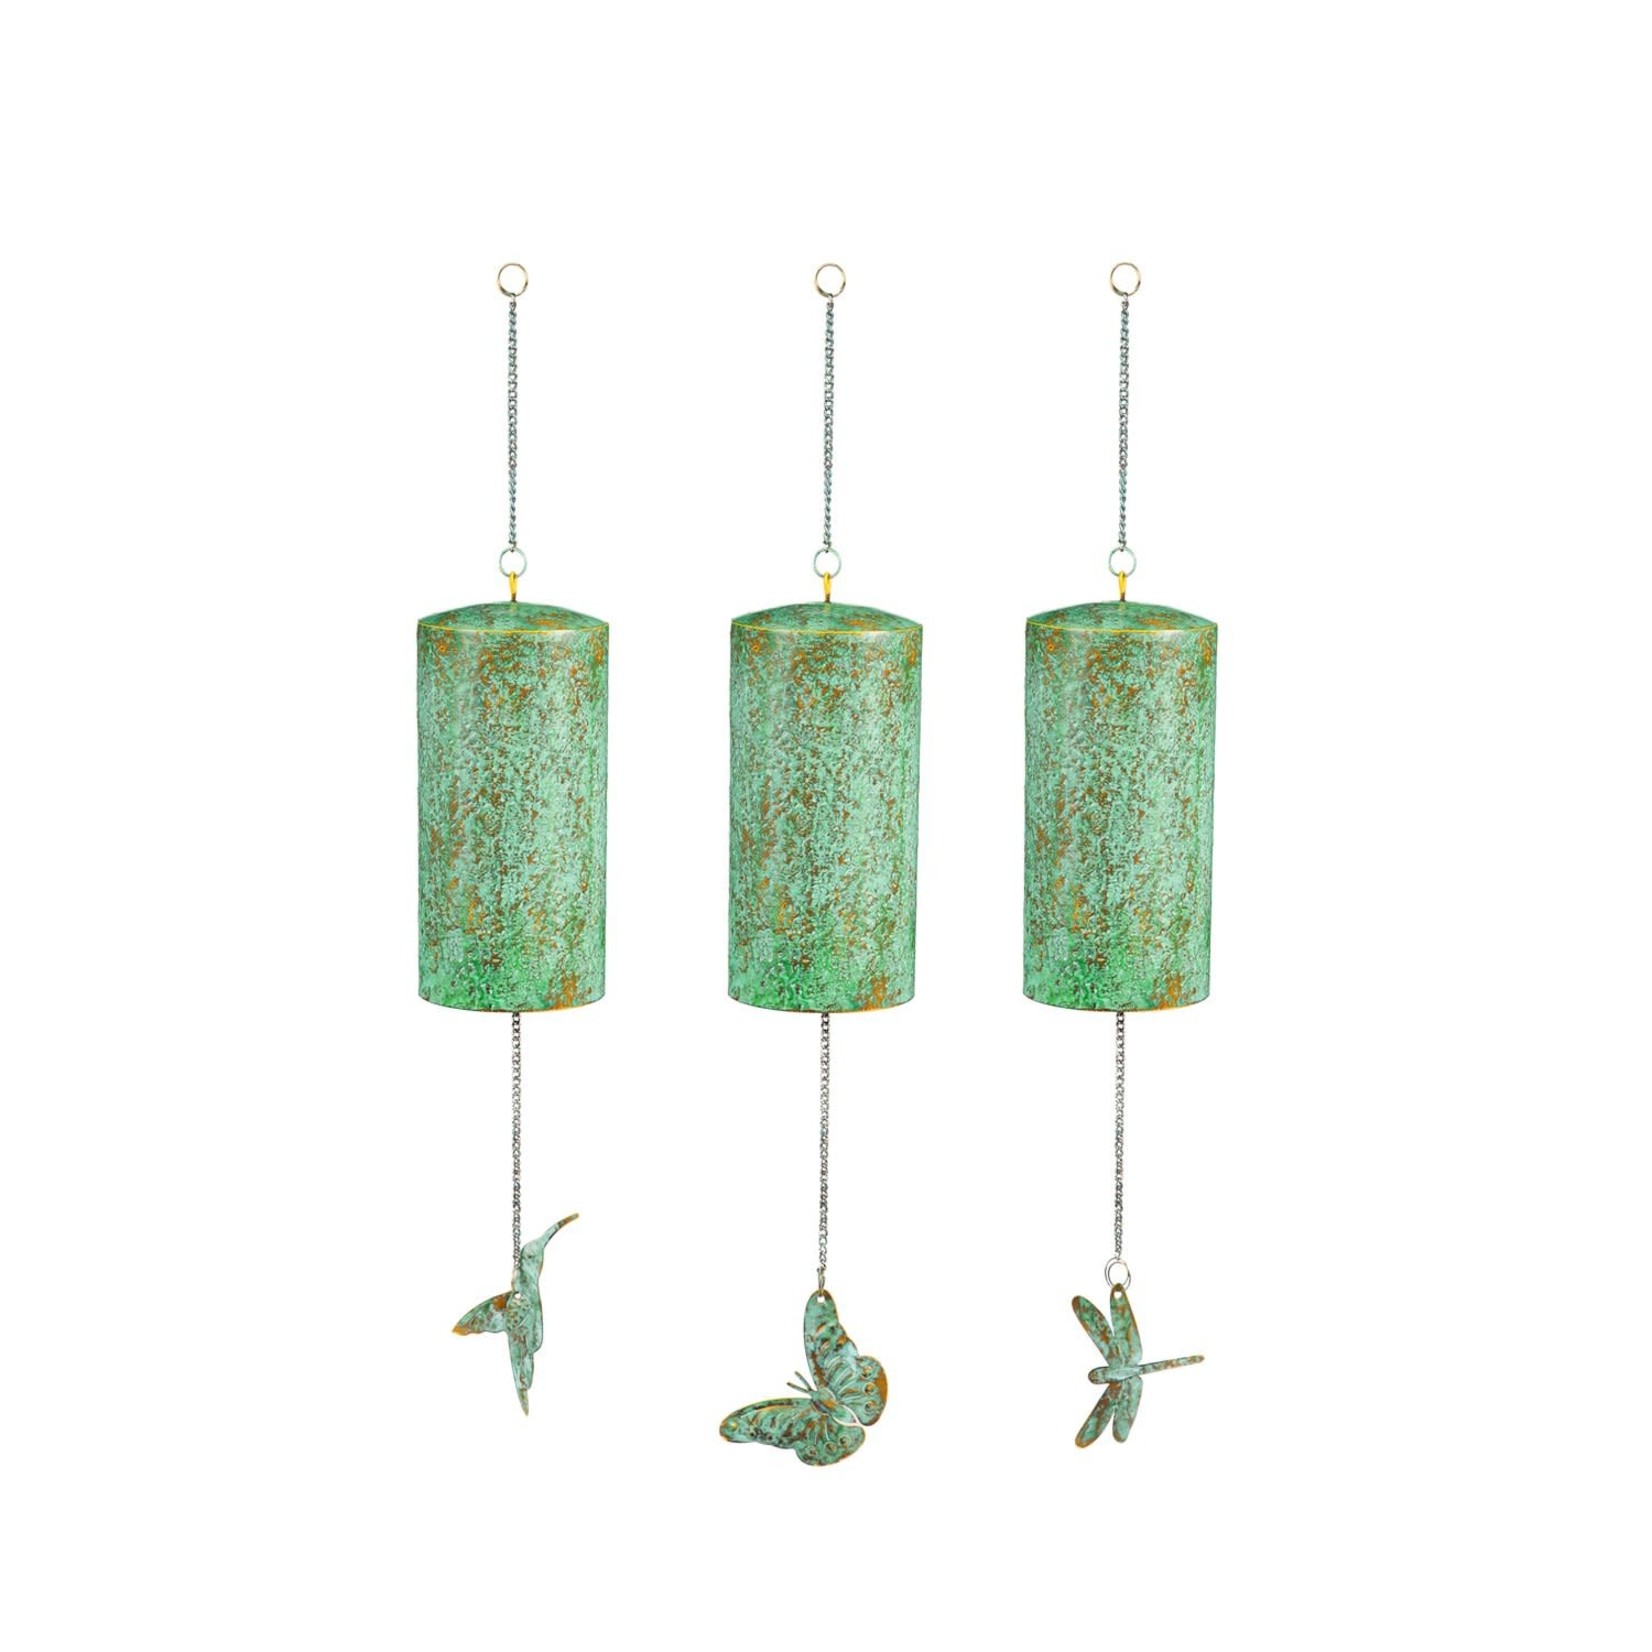 Hammered Metal Wind Bell with Gold and Verdigris Artisan Finish, 3 ASST